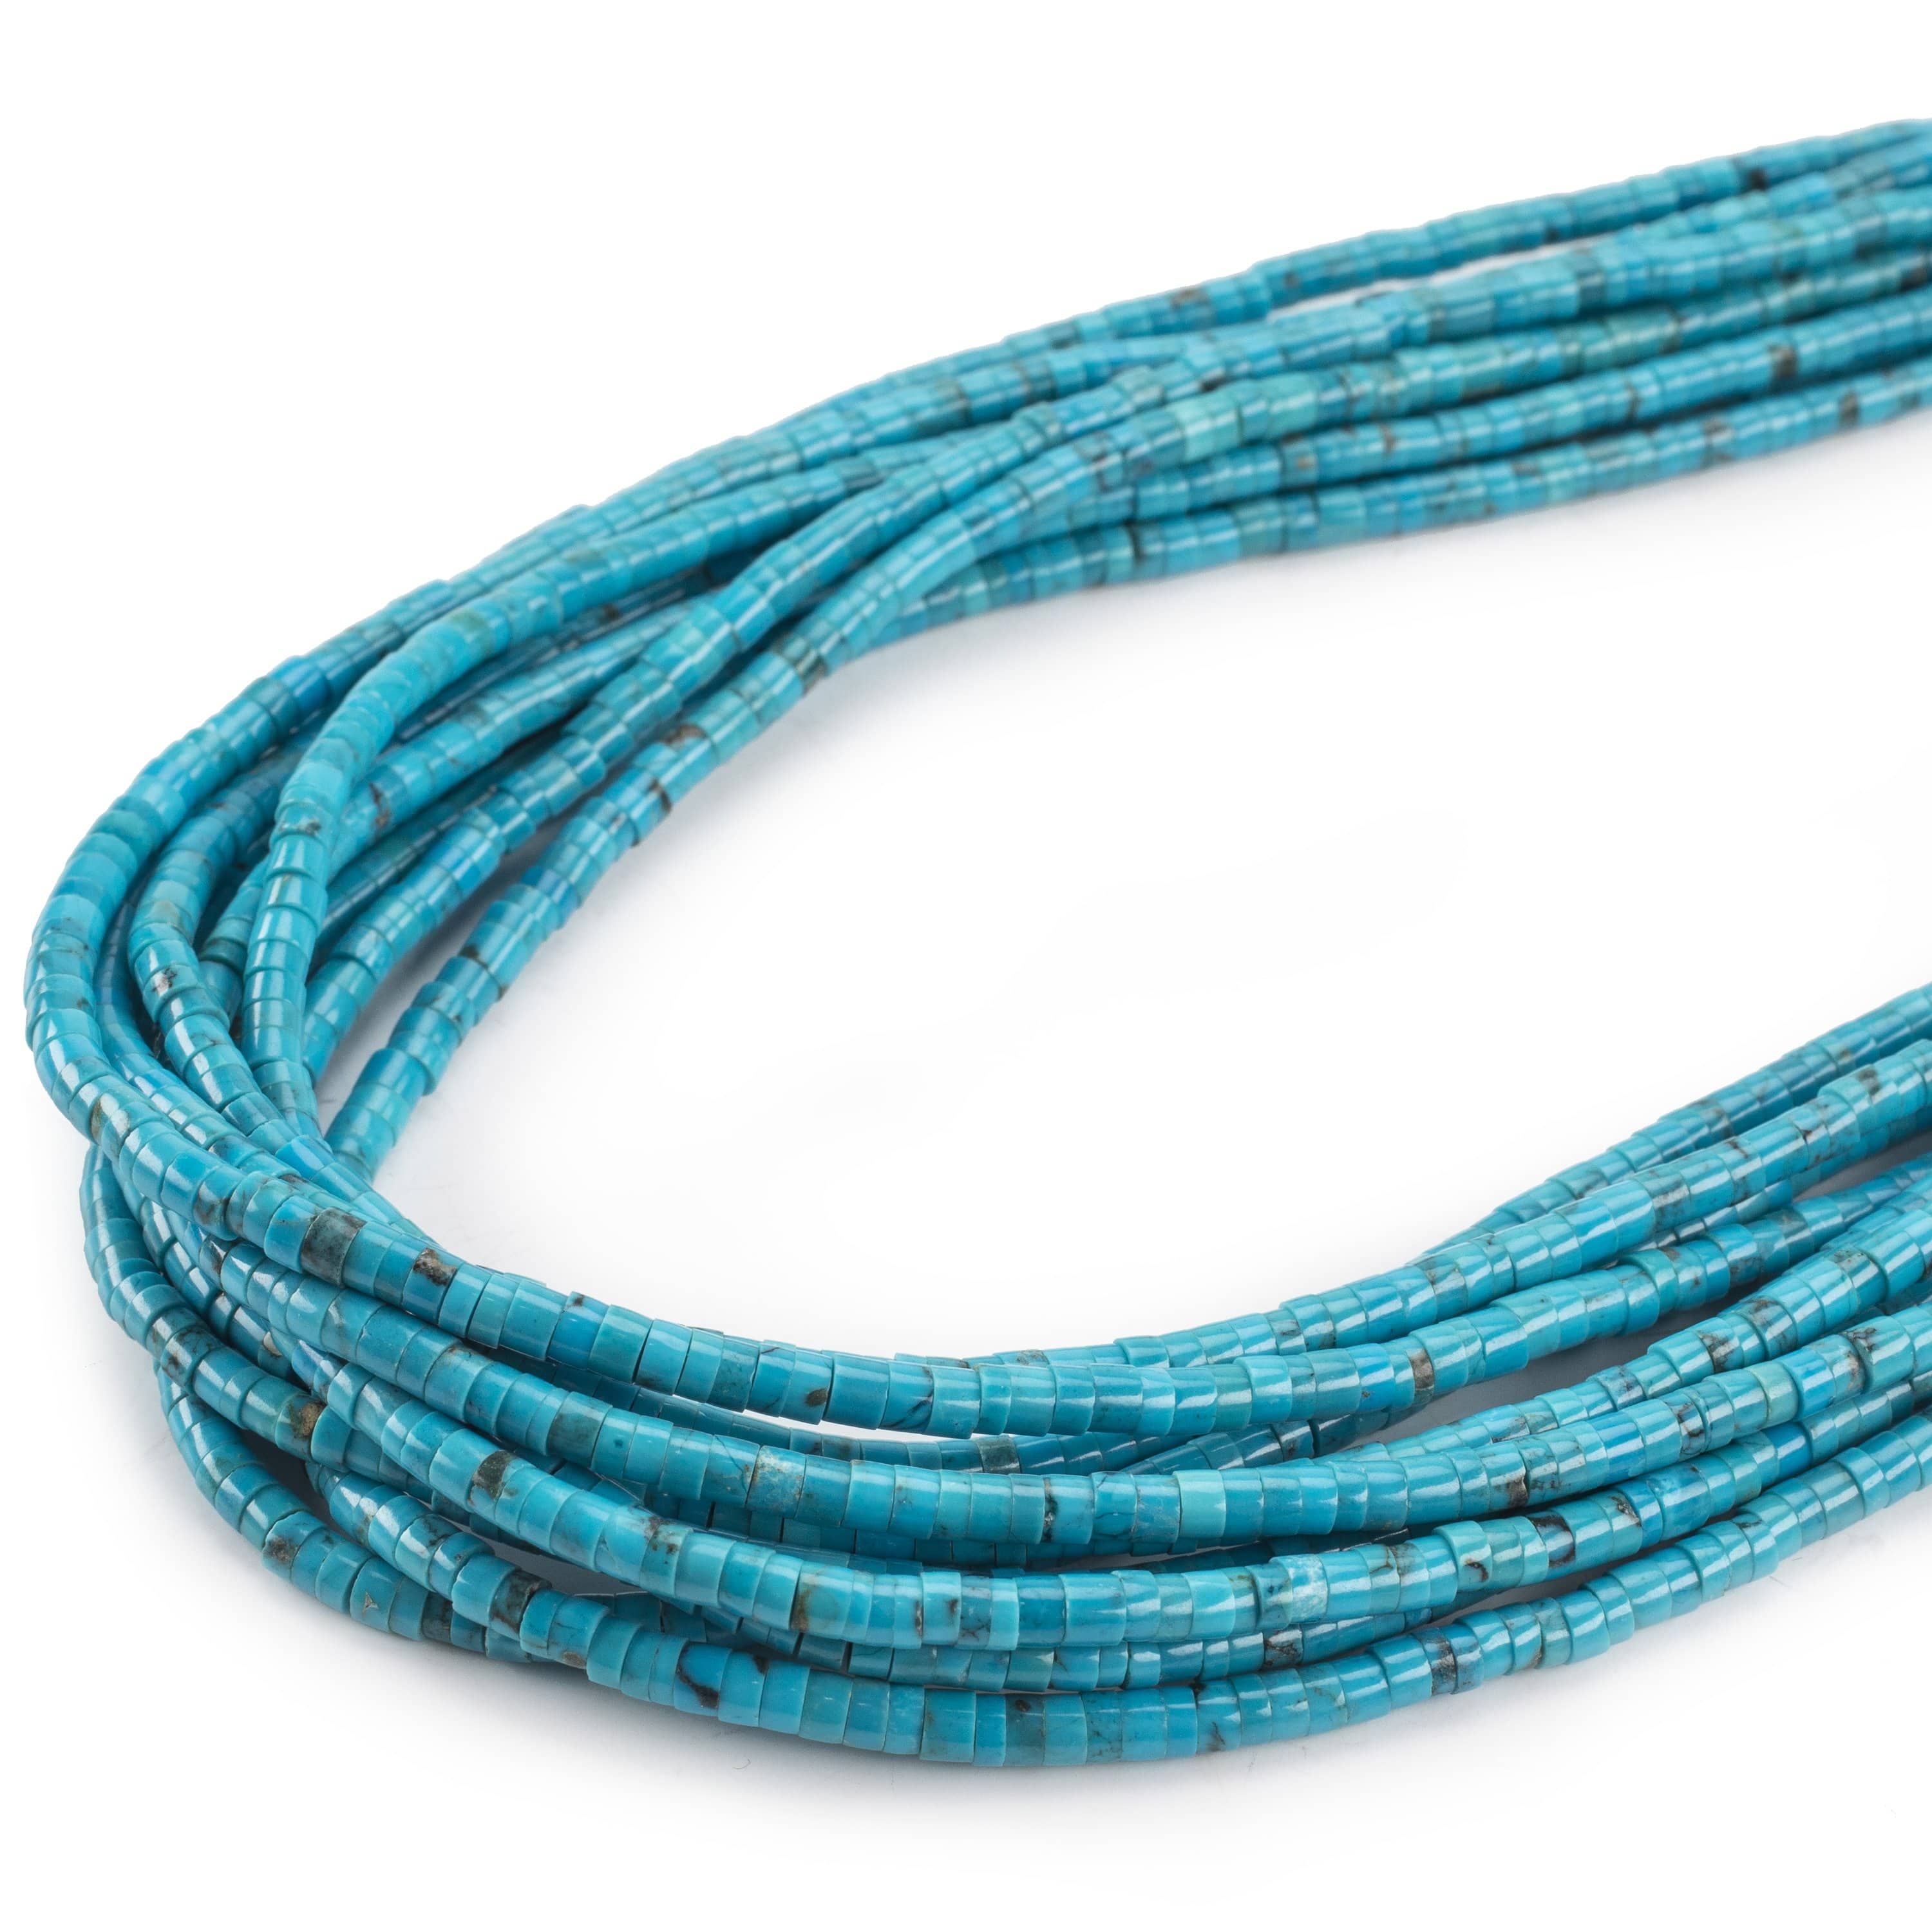 Kalifano Native American Jewelry 24" Ten Strand Genuine Turquoise USA Native American Made 925 Sterling Silver Necklace NAN1800.003